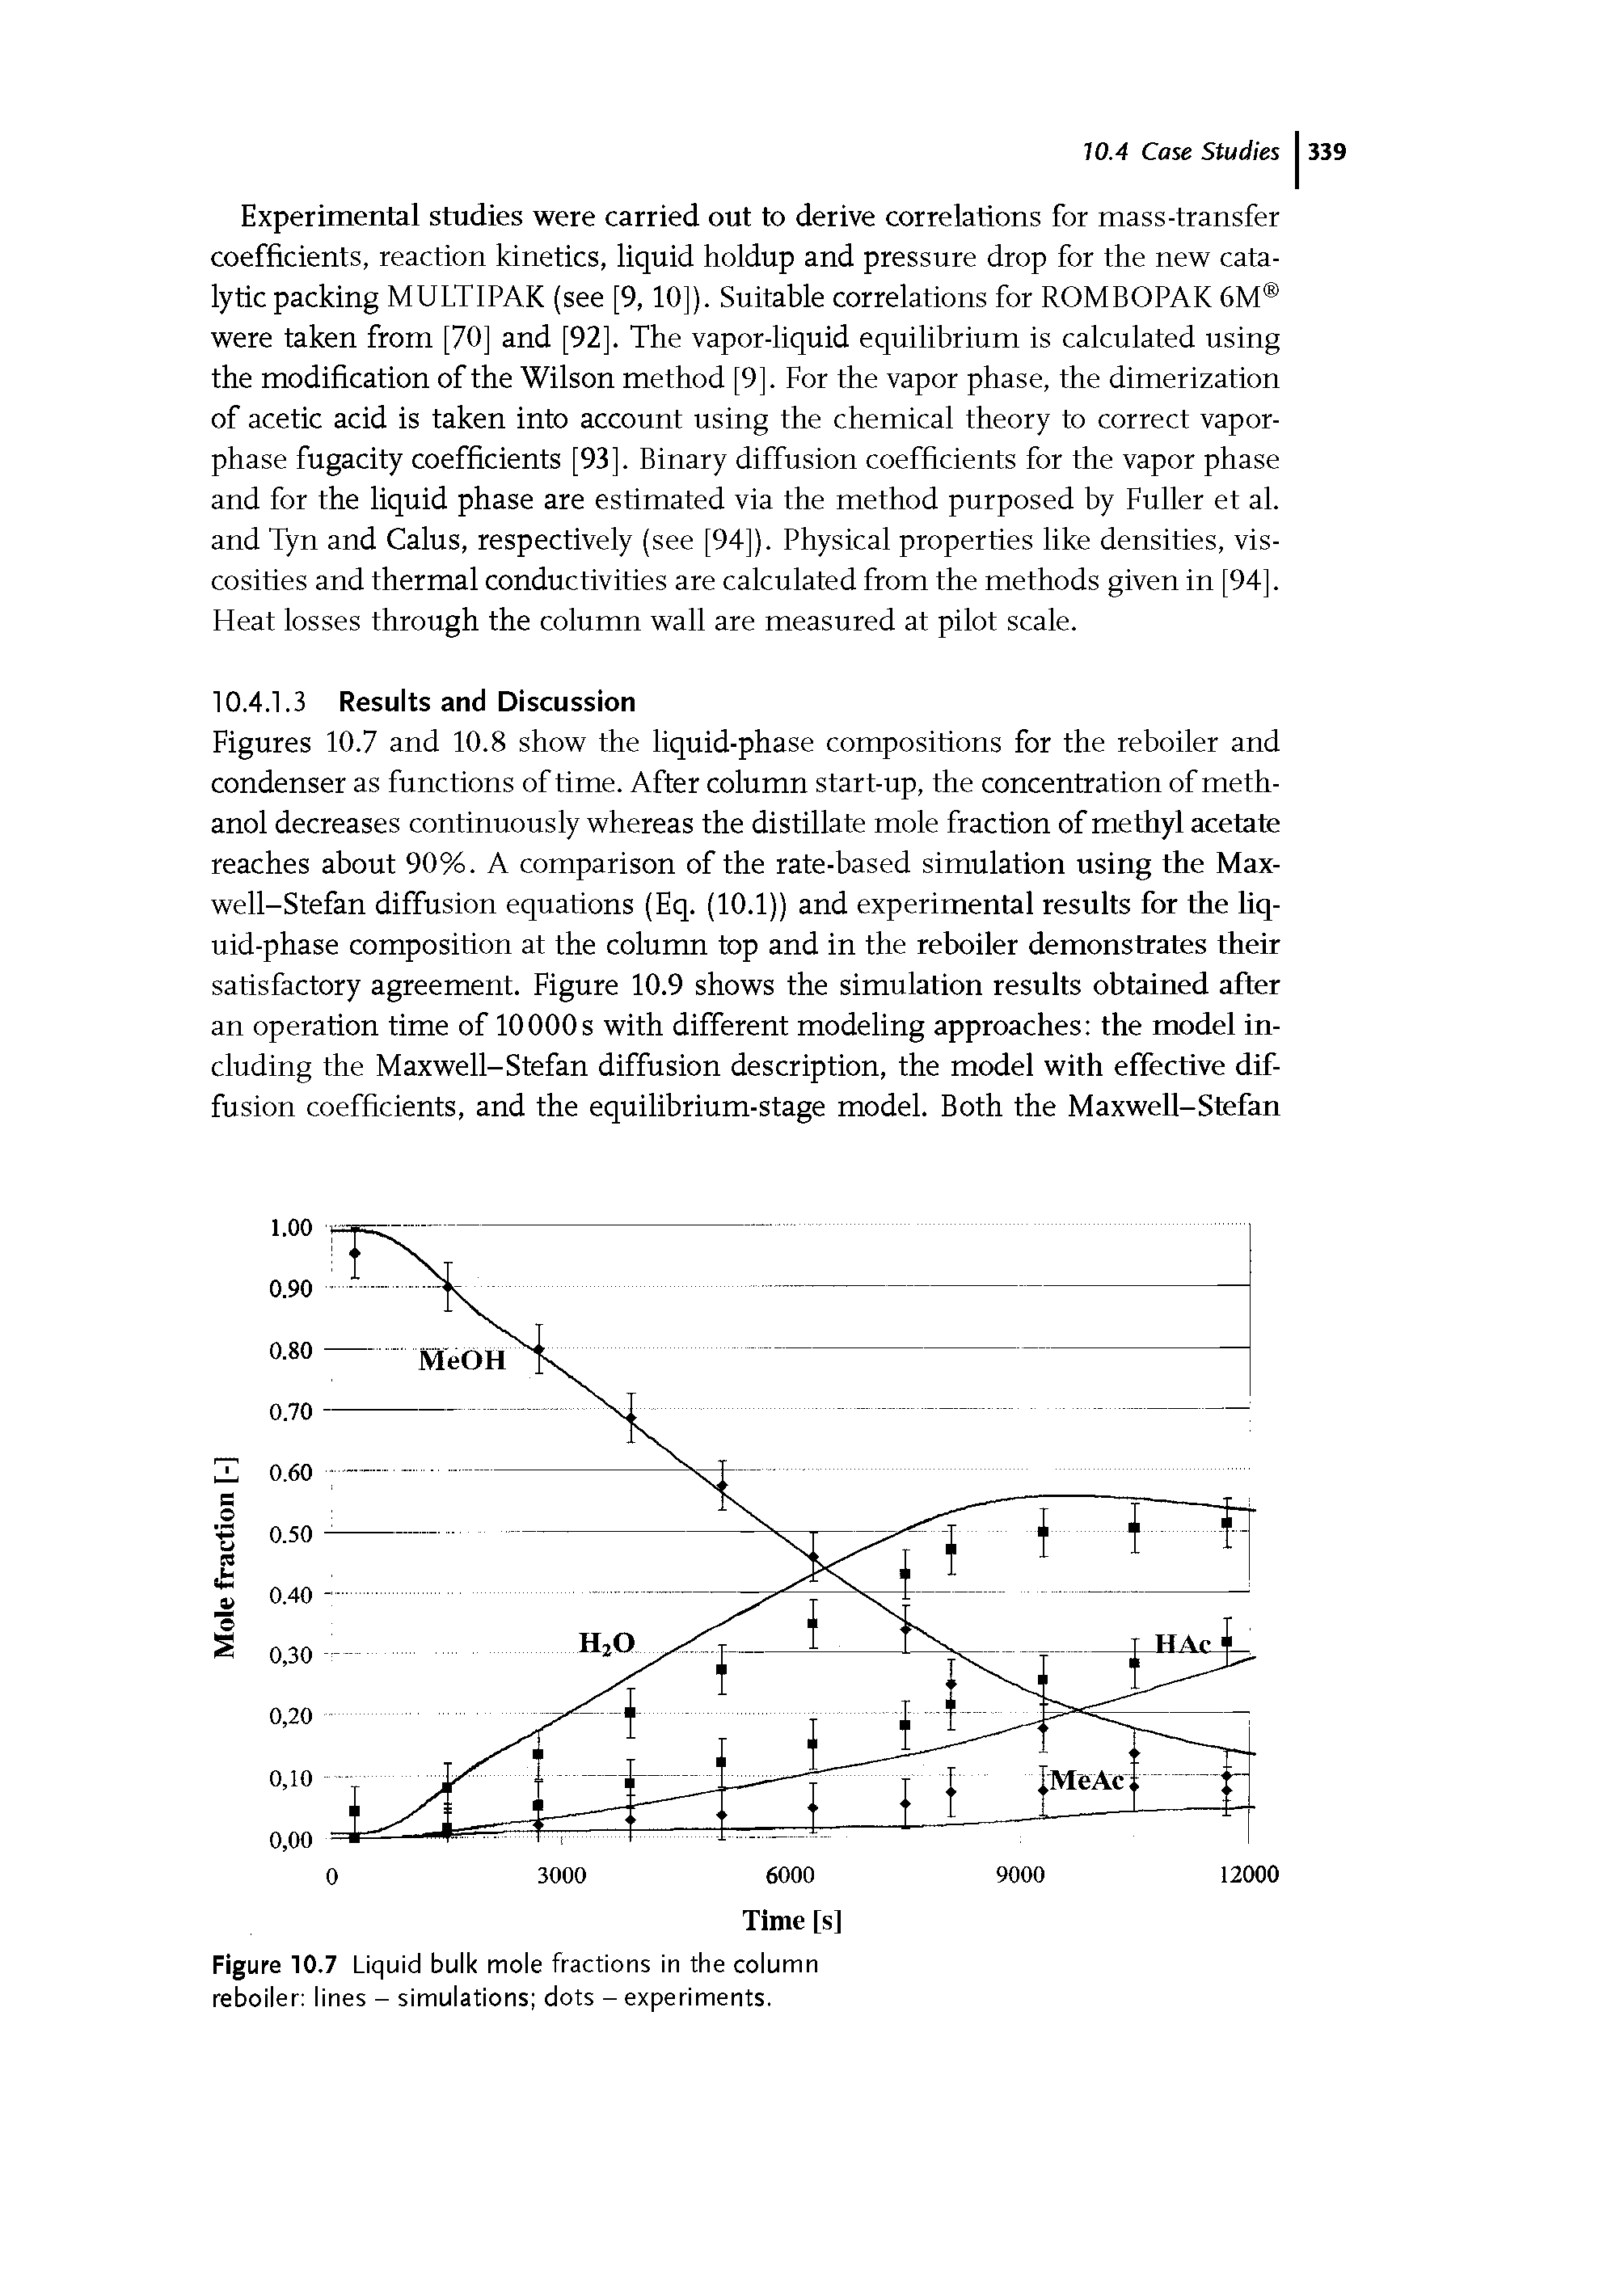 Figures 10.7 and 10.8 show the liquid-phase compositions for the reboiler and condenser as functions of time. After column start-up, the concentration of methanol decreases continuously whereas the distillate mole fraction of methyl acetate reaches about 90%. A comparison of the rate-based simulation using the Max-well-Stefan diffusion equations (Eq. (10.1)) and experimental results for the liquid-phase composition at the column top and in the reboiler demonstrates their satisfactory agreement. Figure 10.9 shows the simulation results obtained after an operation time of 10000 s with different modeling approaches the model including the Maxwell-Stefan diffusion description, the model with effective diffusion coefficients, and the equilibrium-stage model. Both the Maxwell-Stefan...